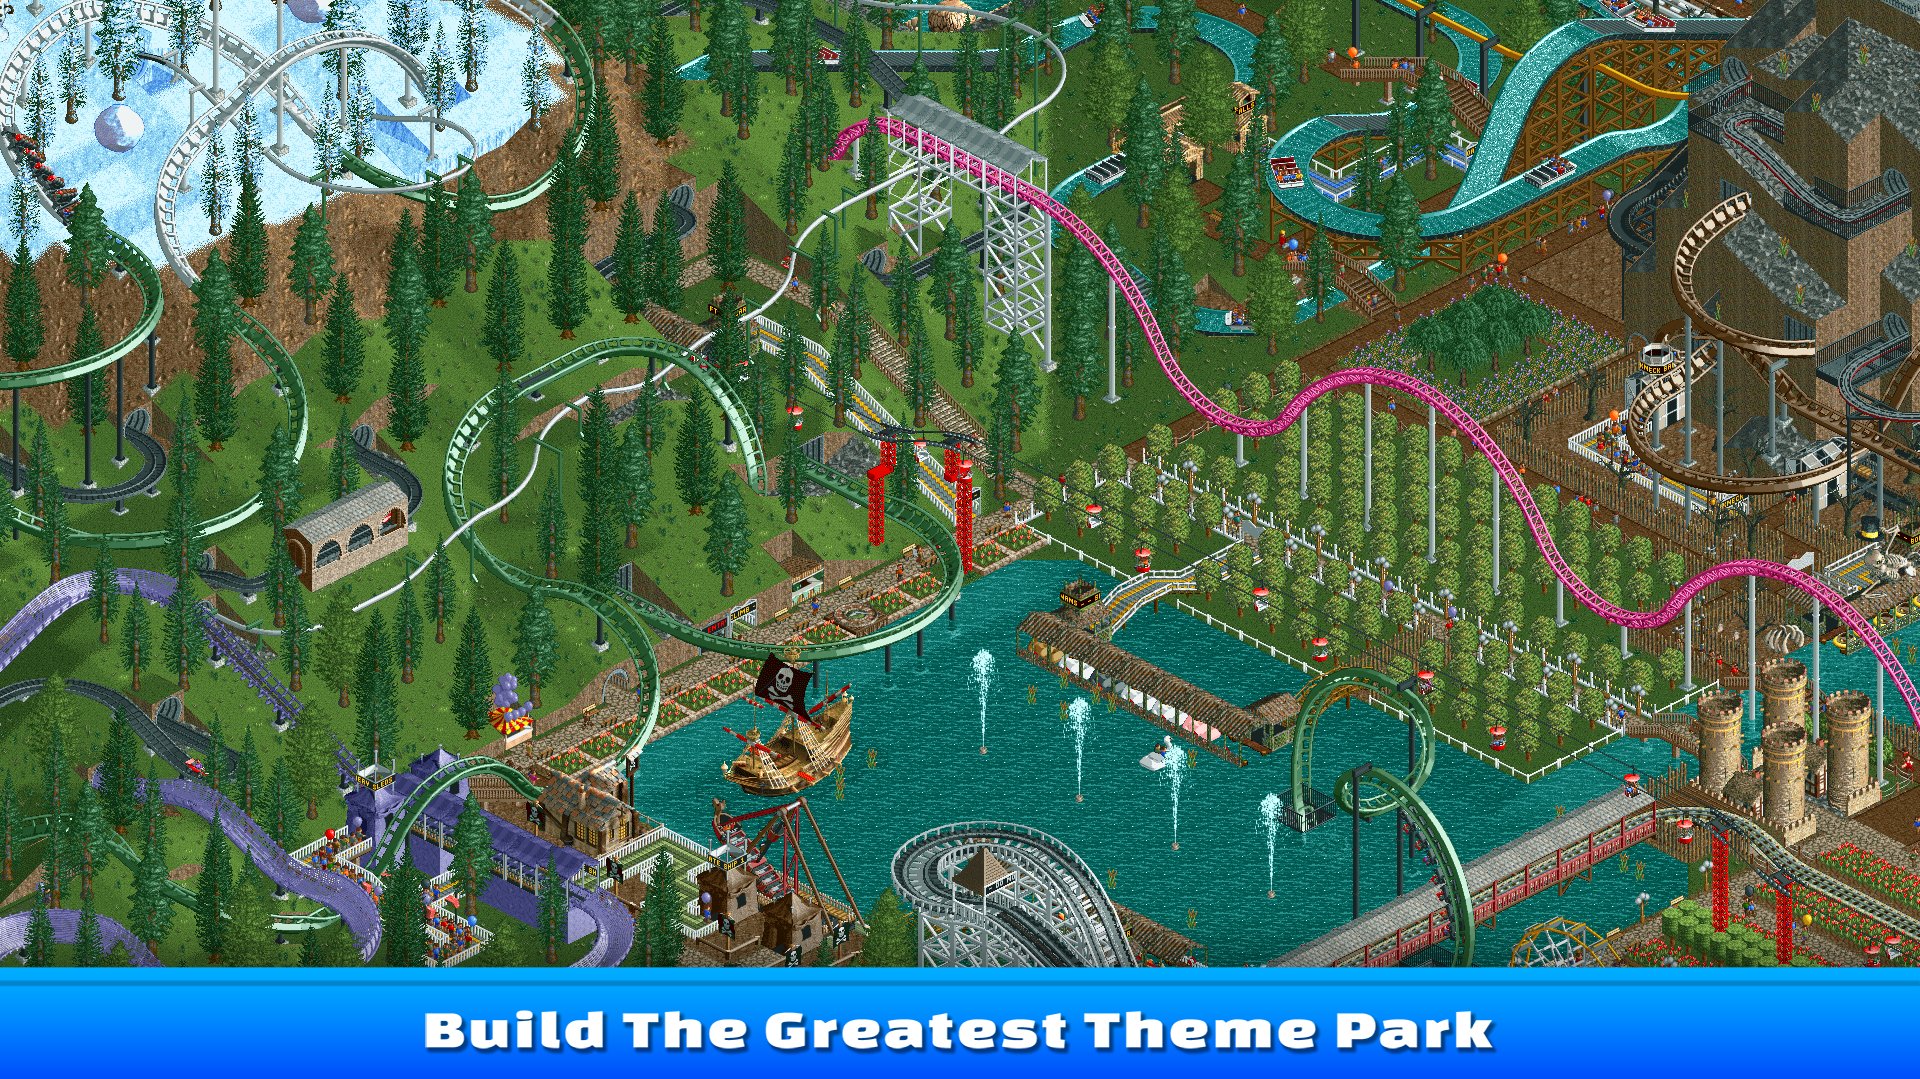 roller coaster tycoon classic download pc